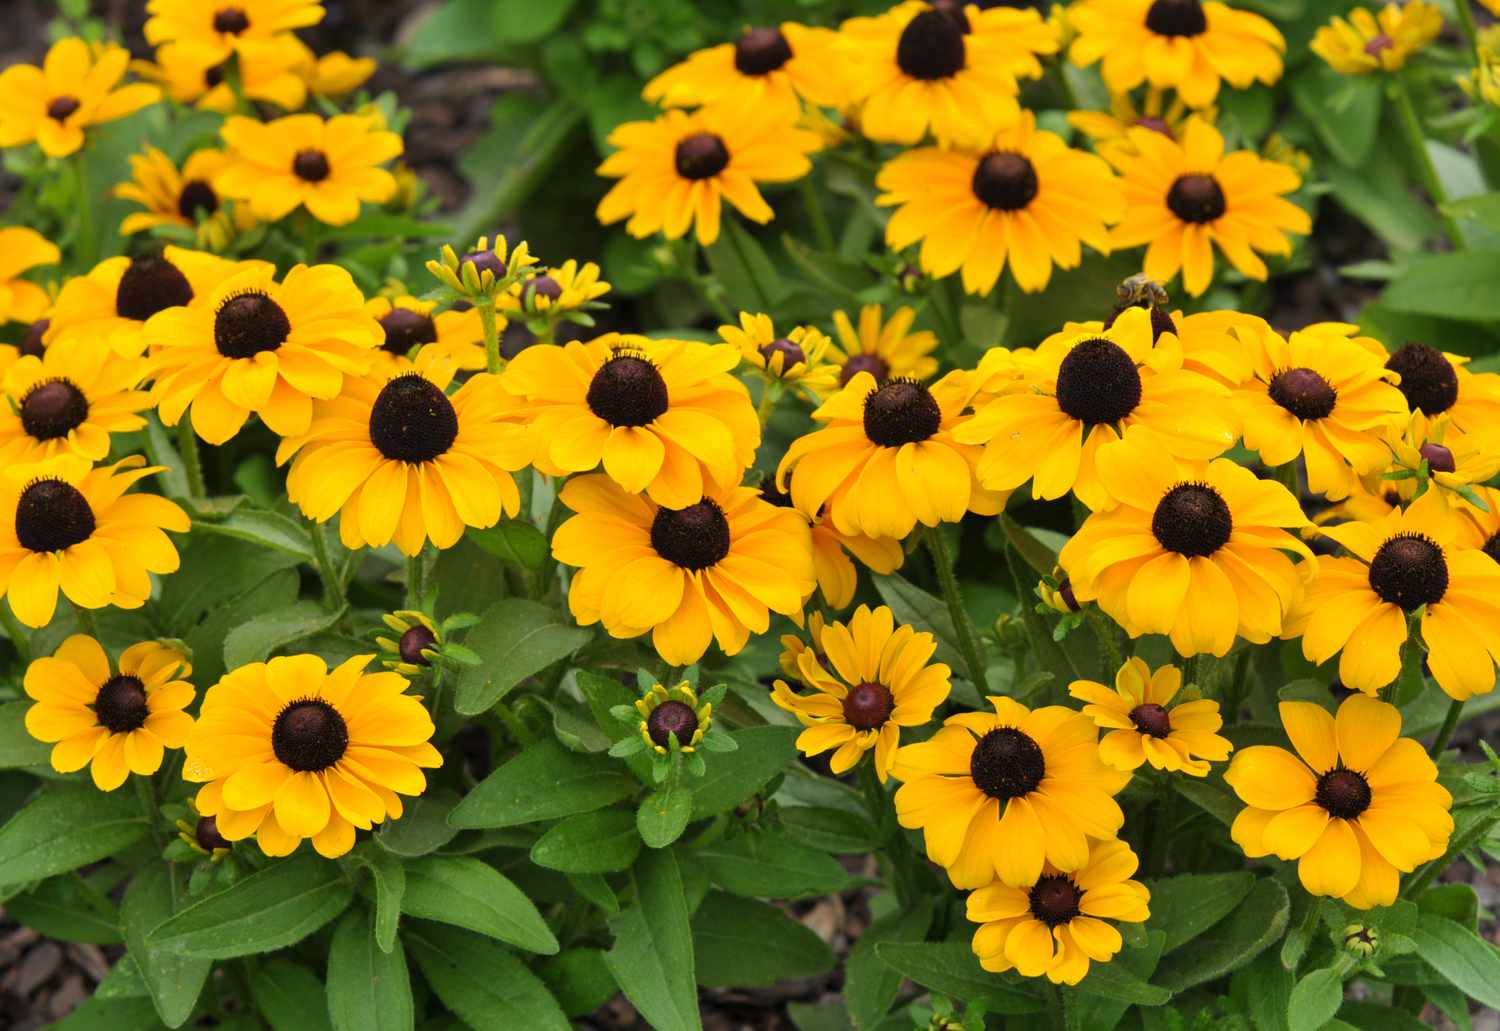 Black-eyed susan plants with small yellow flowers and buds